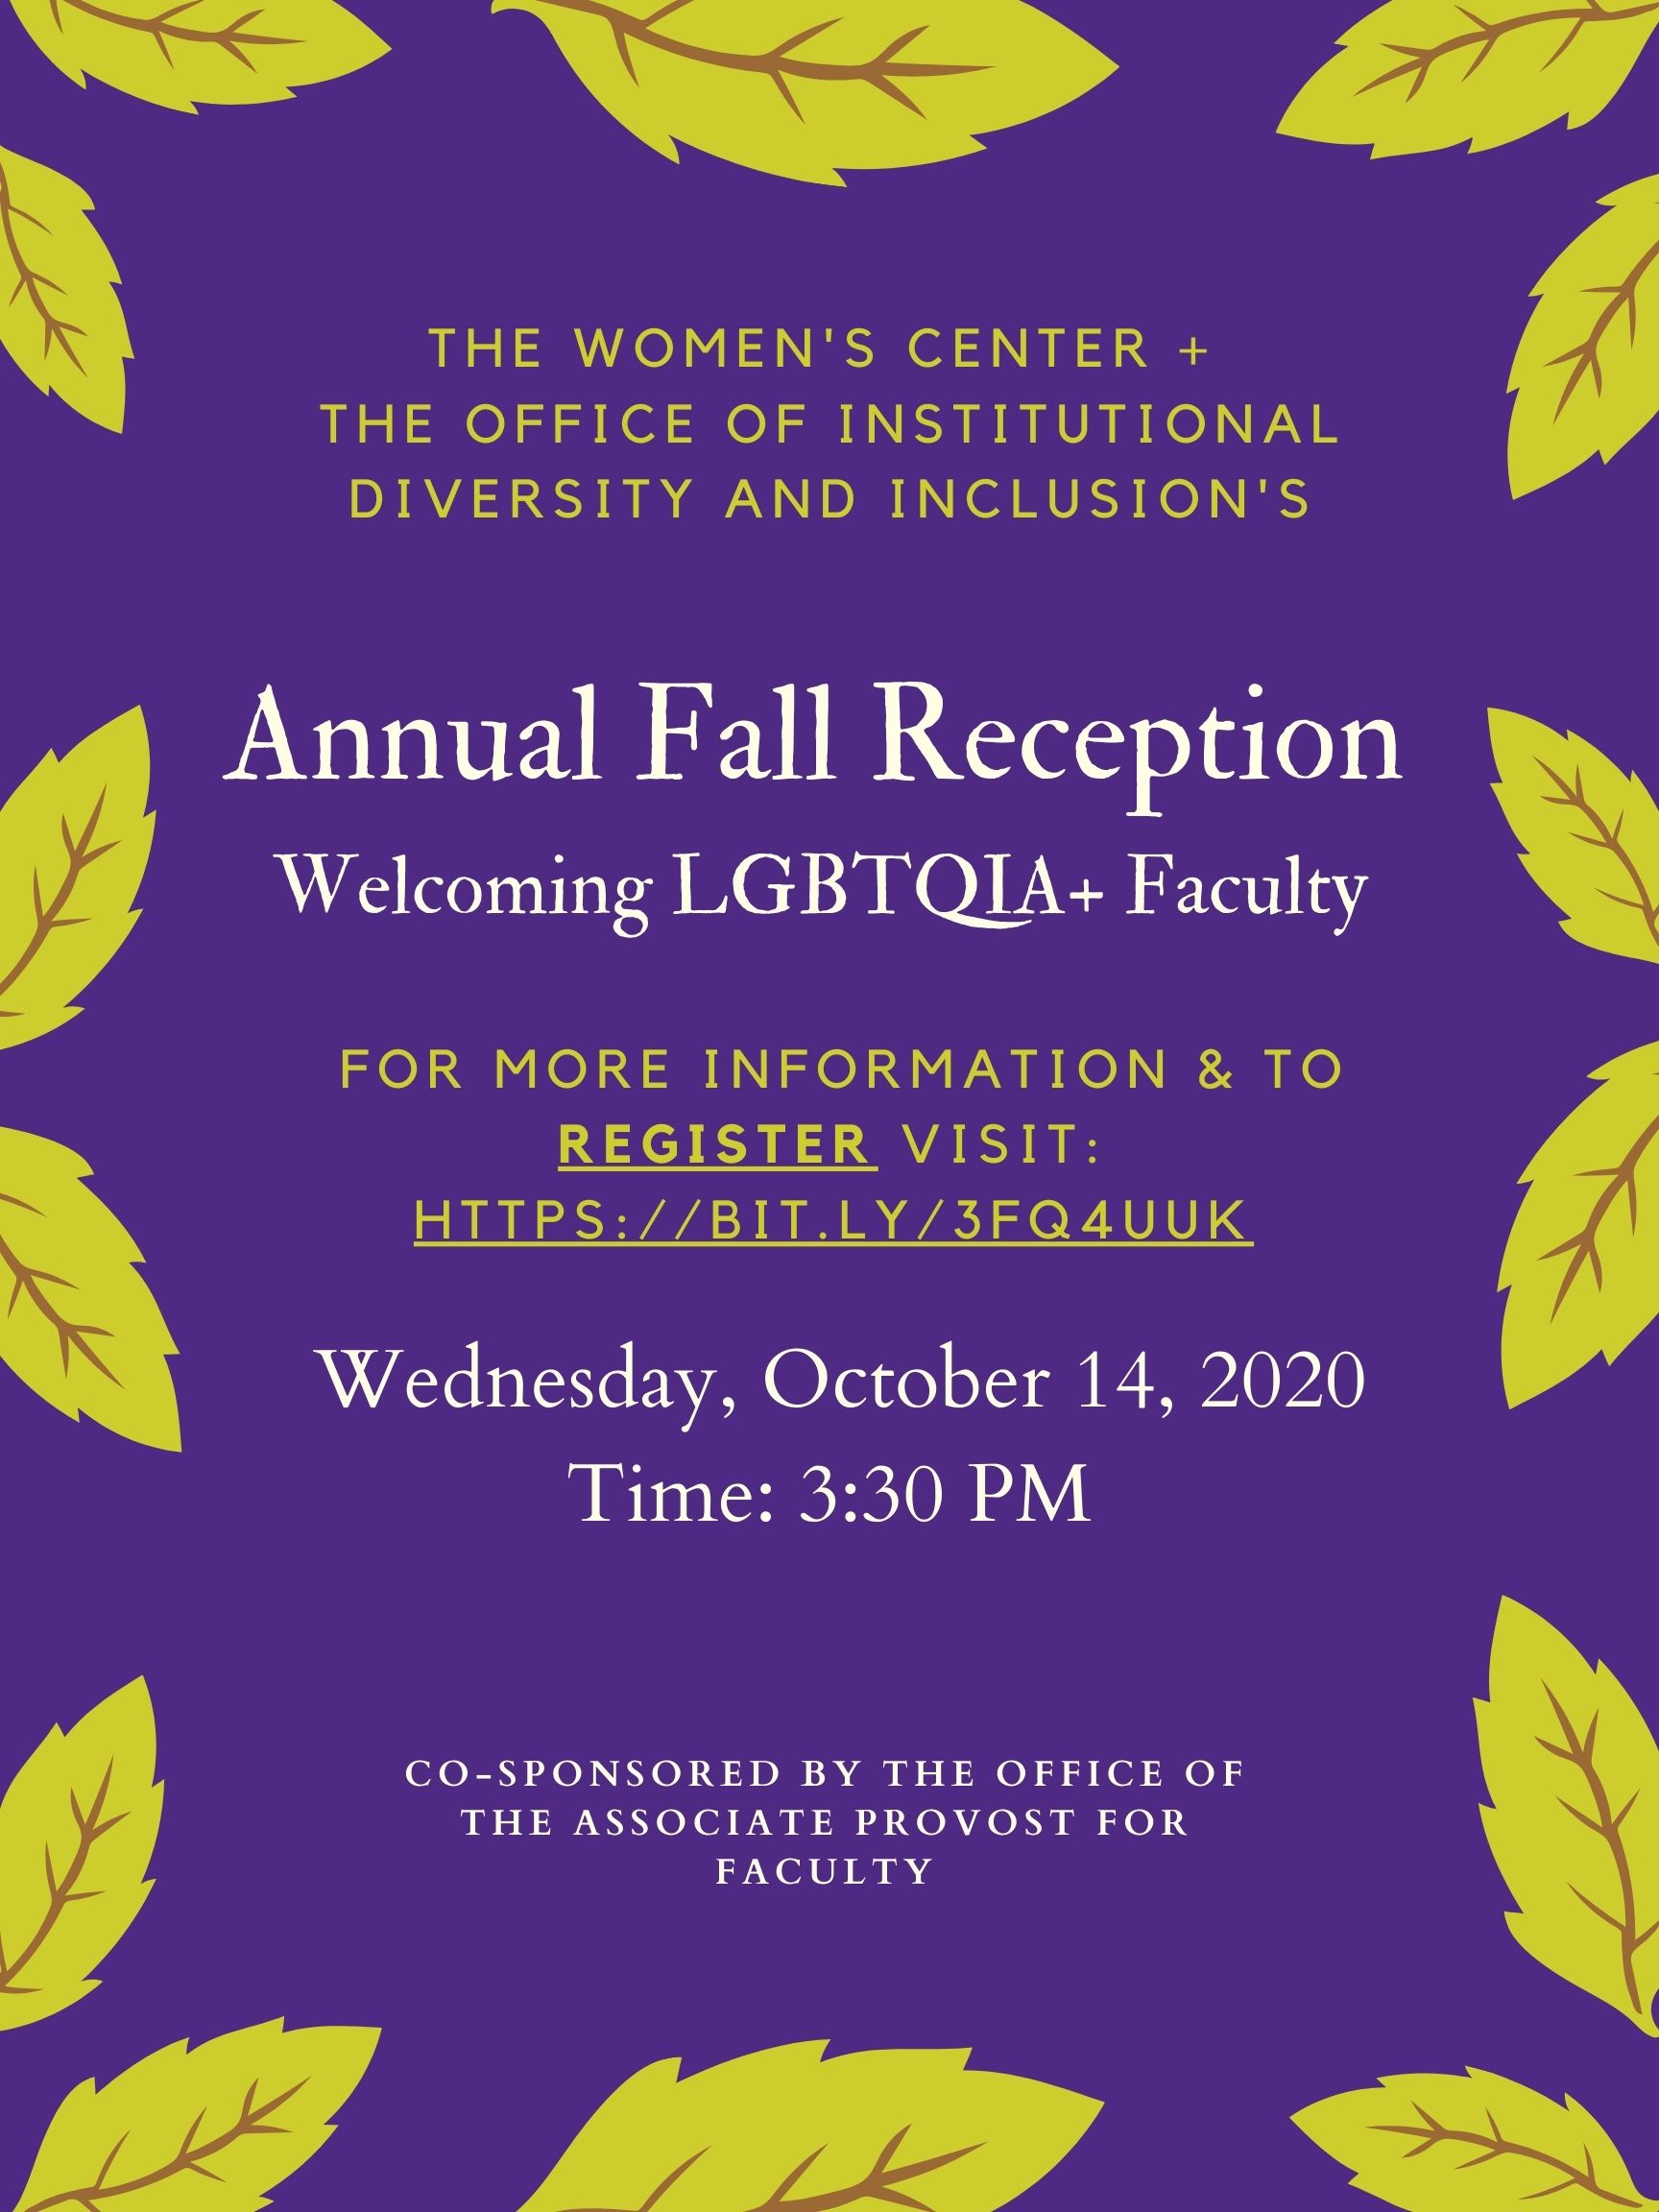 flyer for annual fall reception welcoming LGBTQIA+